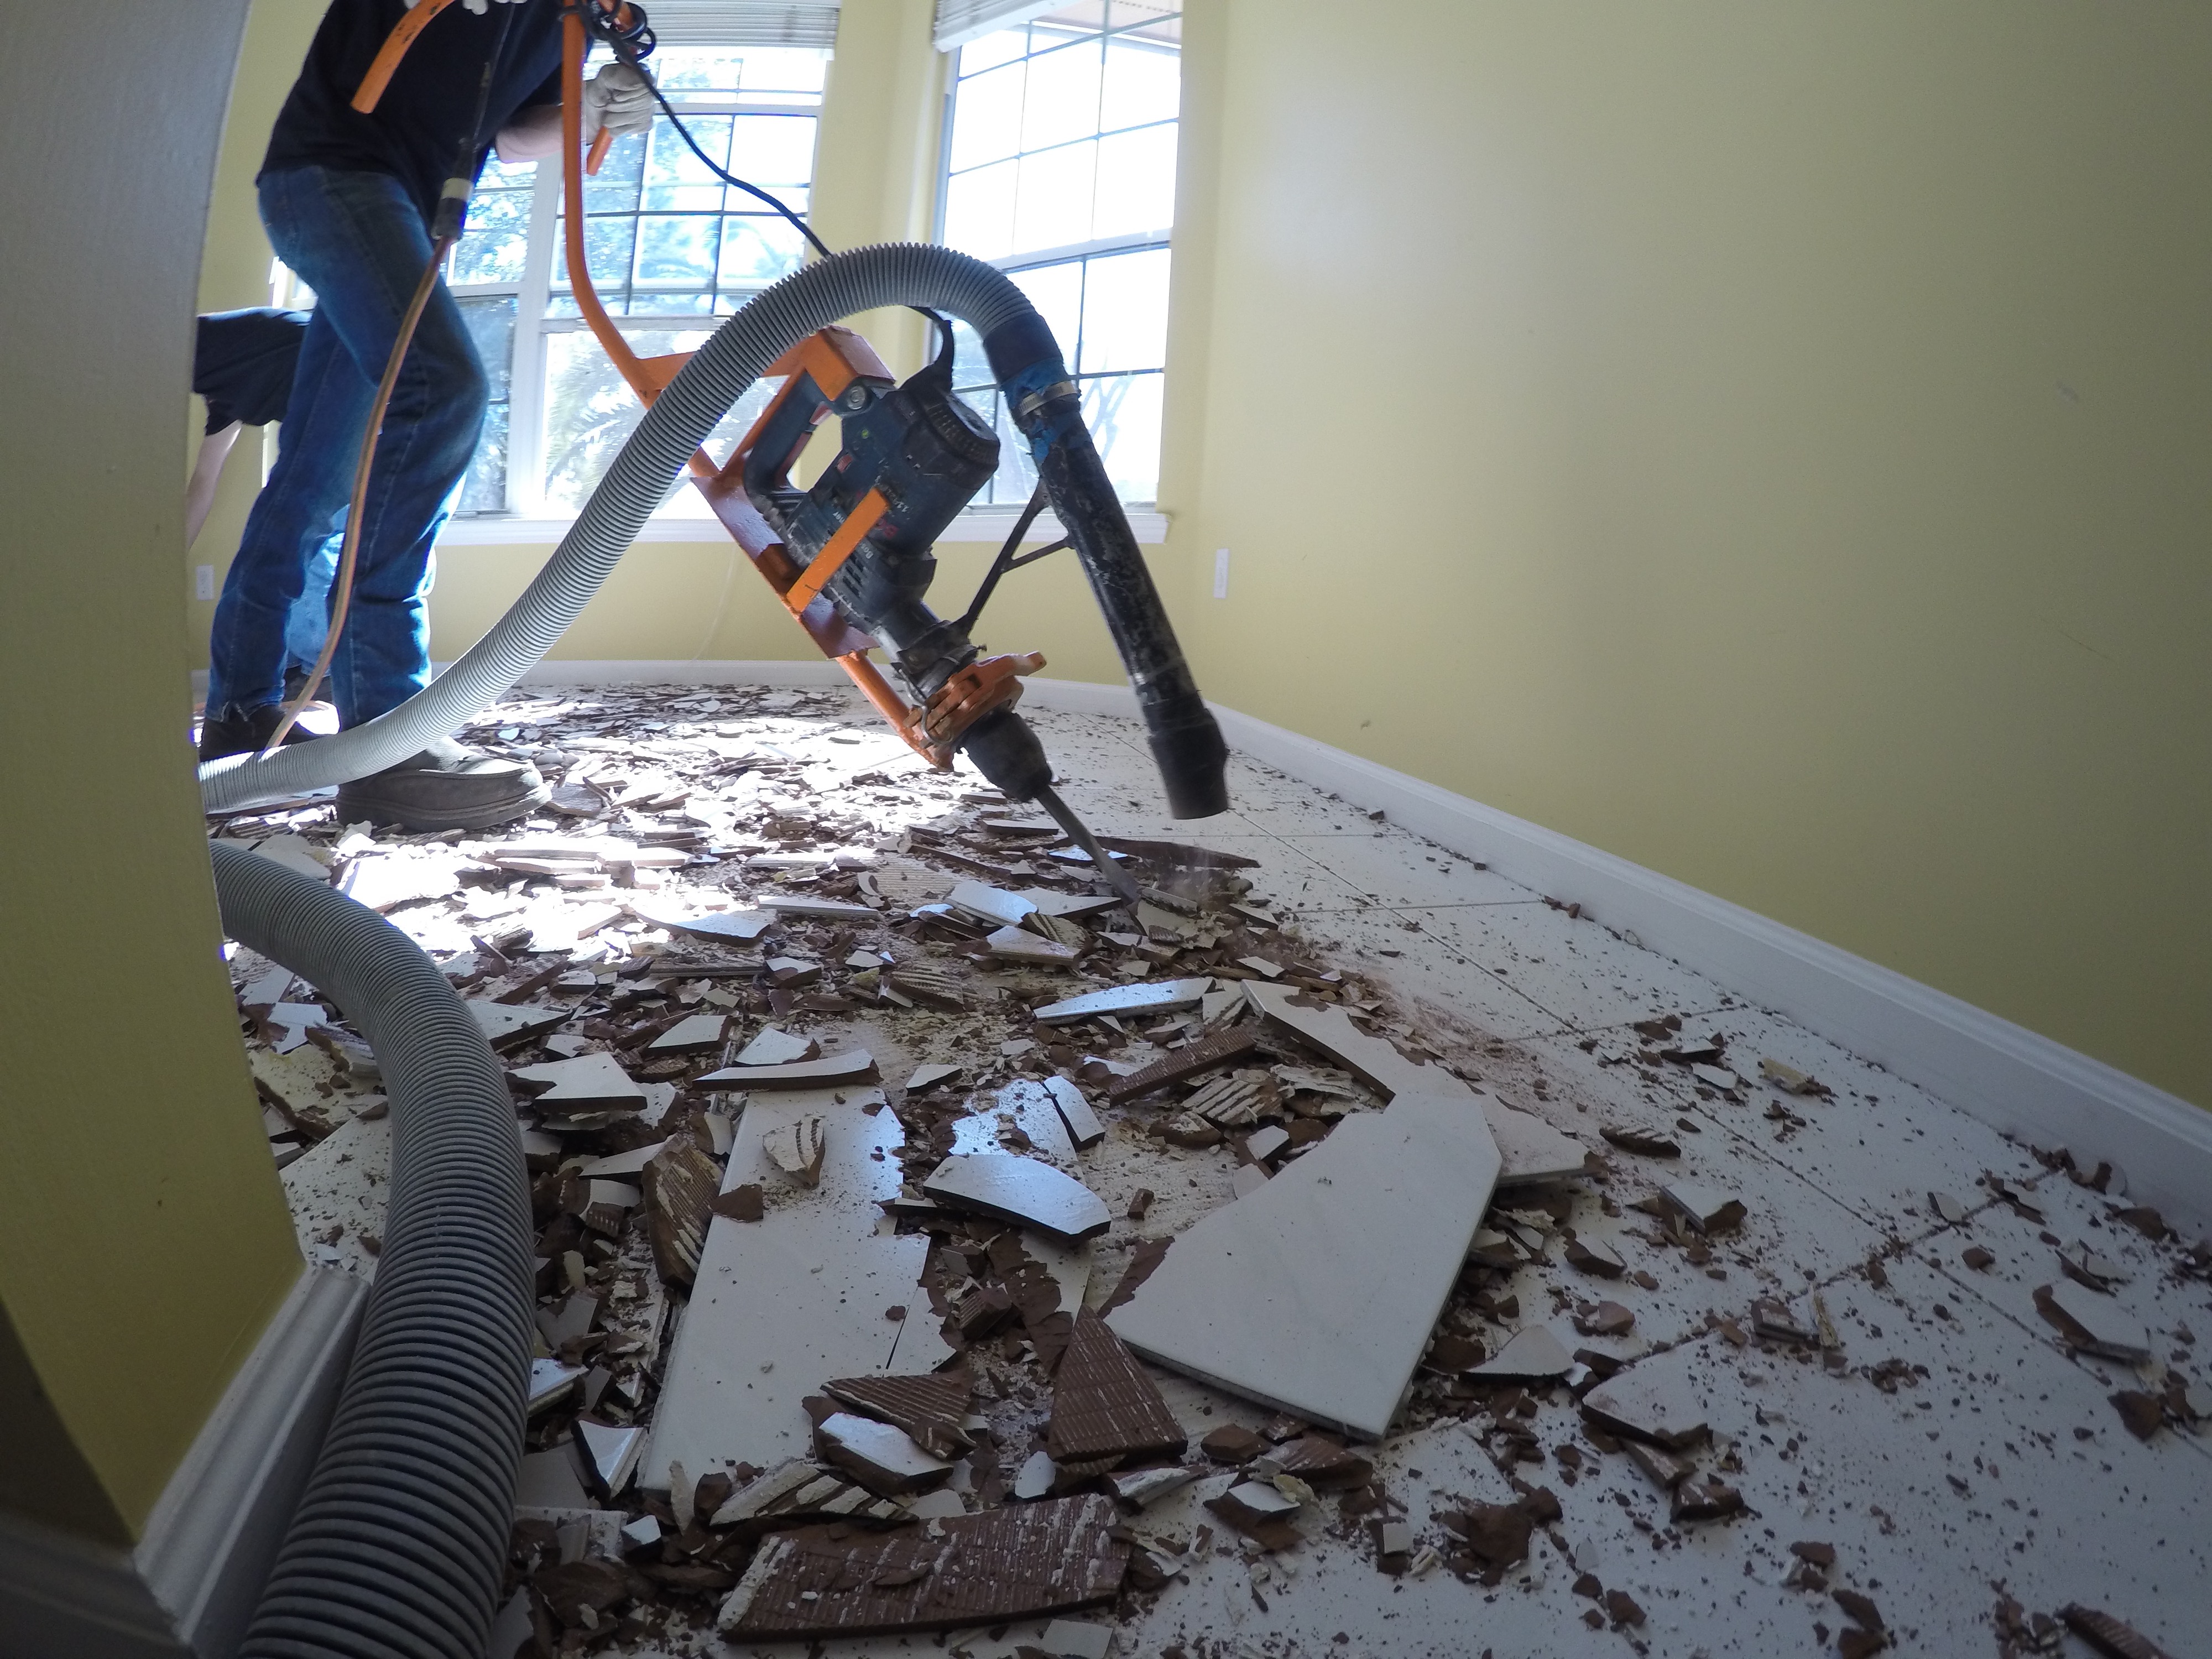 Tile Removal The Easy Way Sdy, Removing Floor Tile